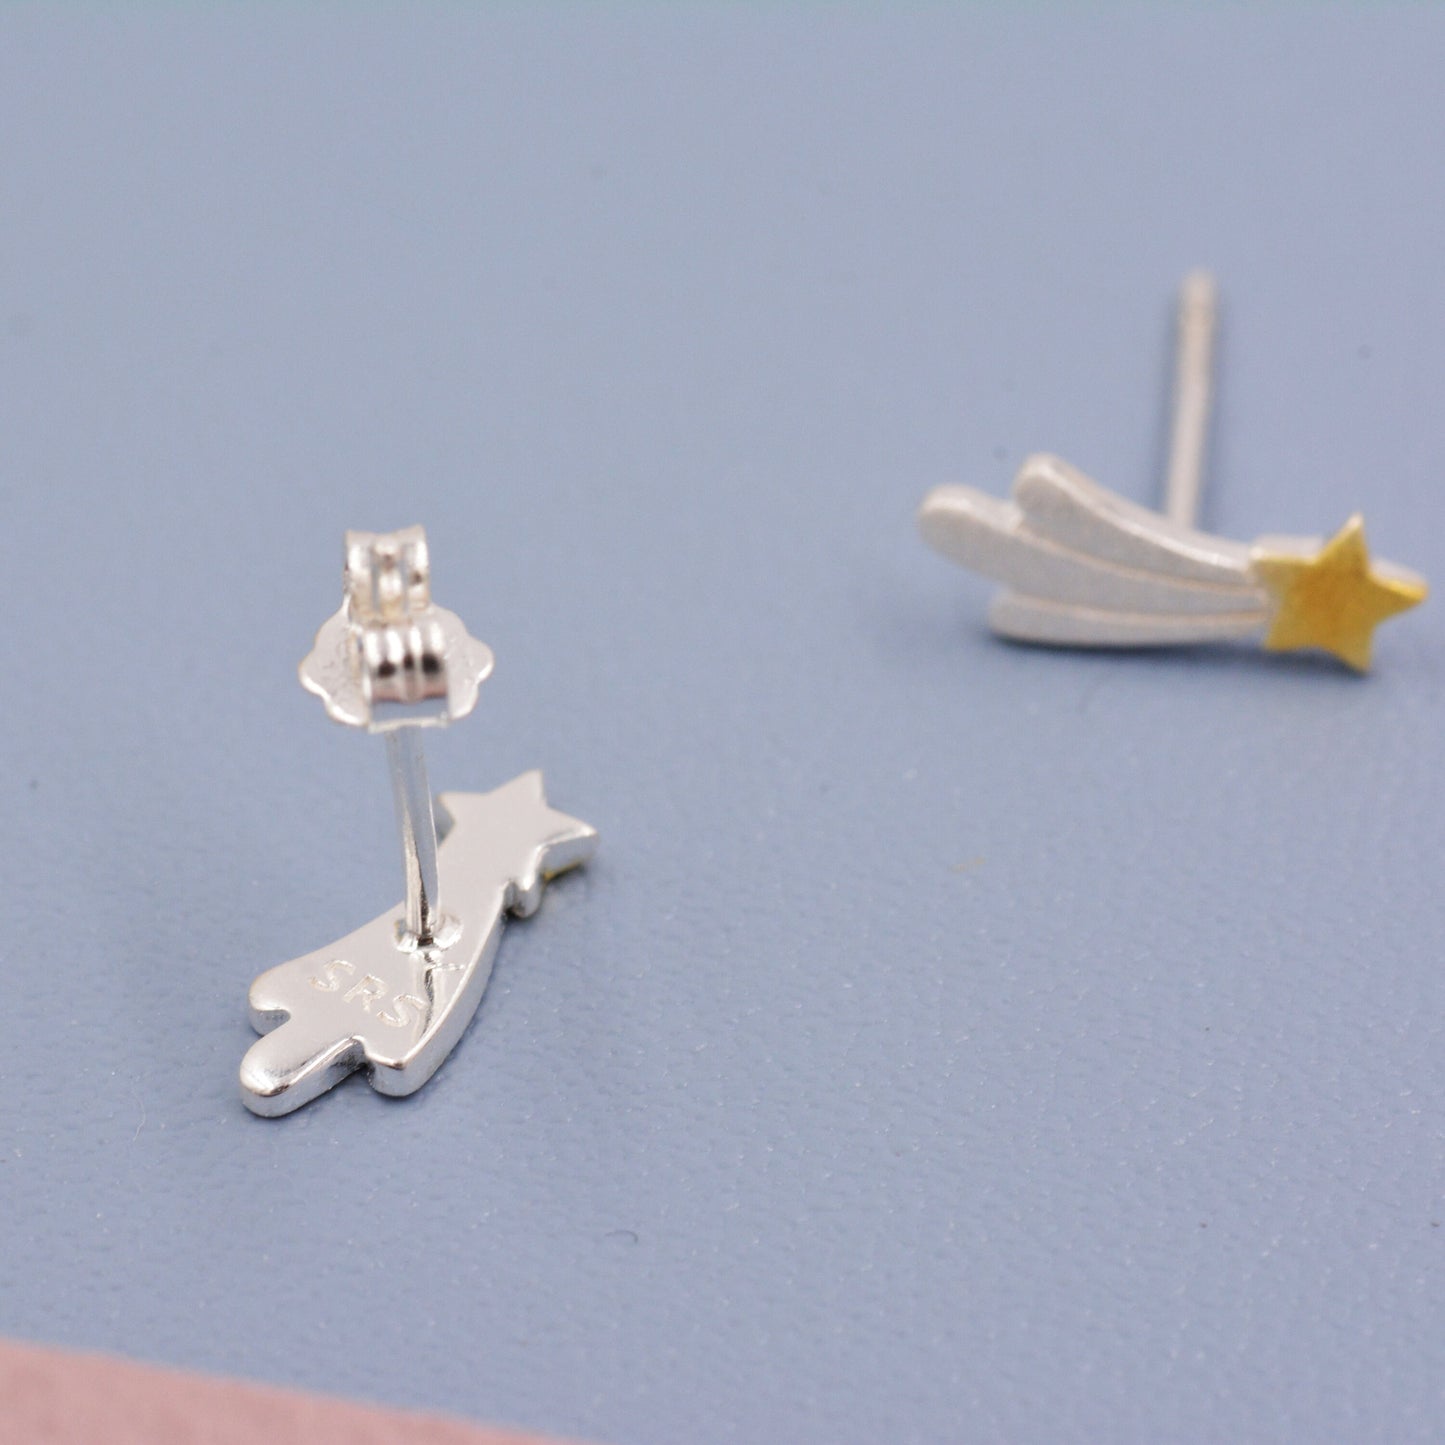 Dainty Shooting Star Stud Earrings in Sterling Silver - Two Tone Gold and Silver Earrings - Frosted Finish -  Fun, Whimsical